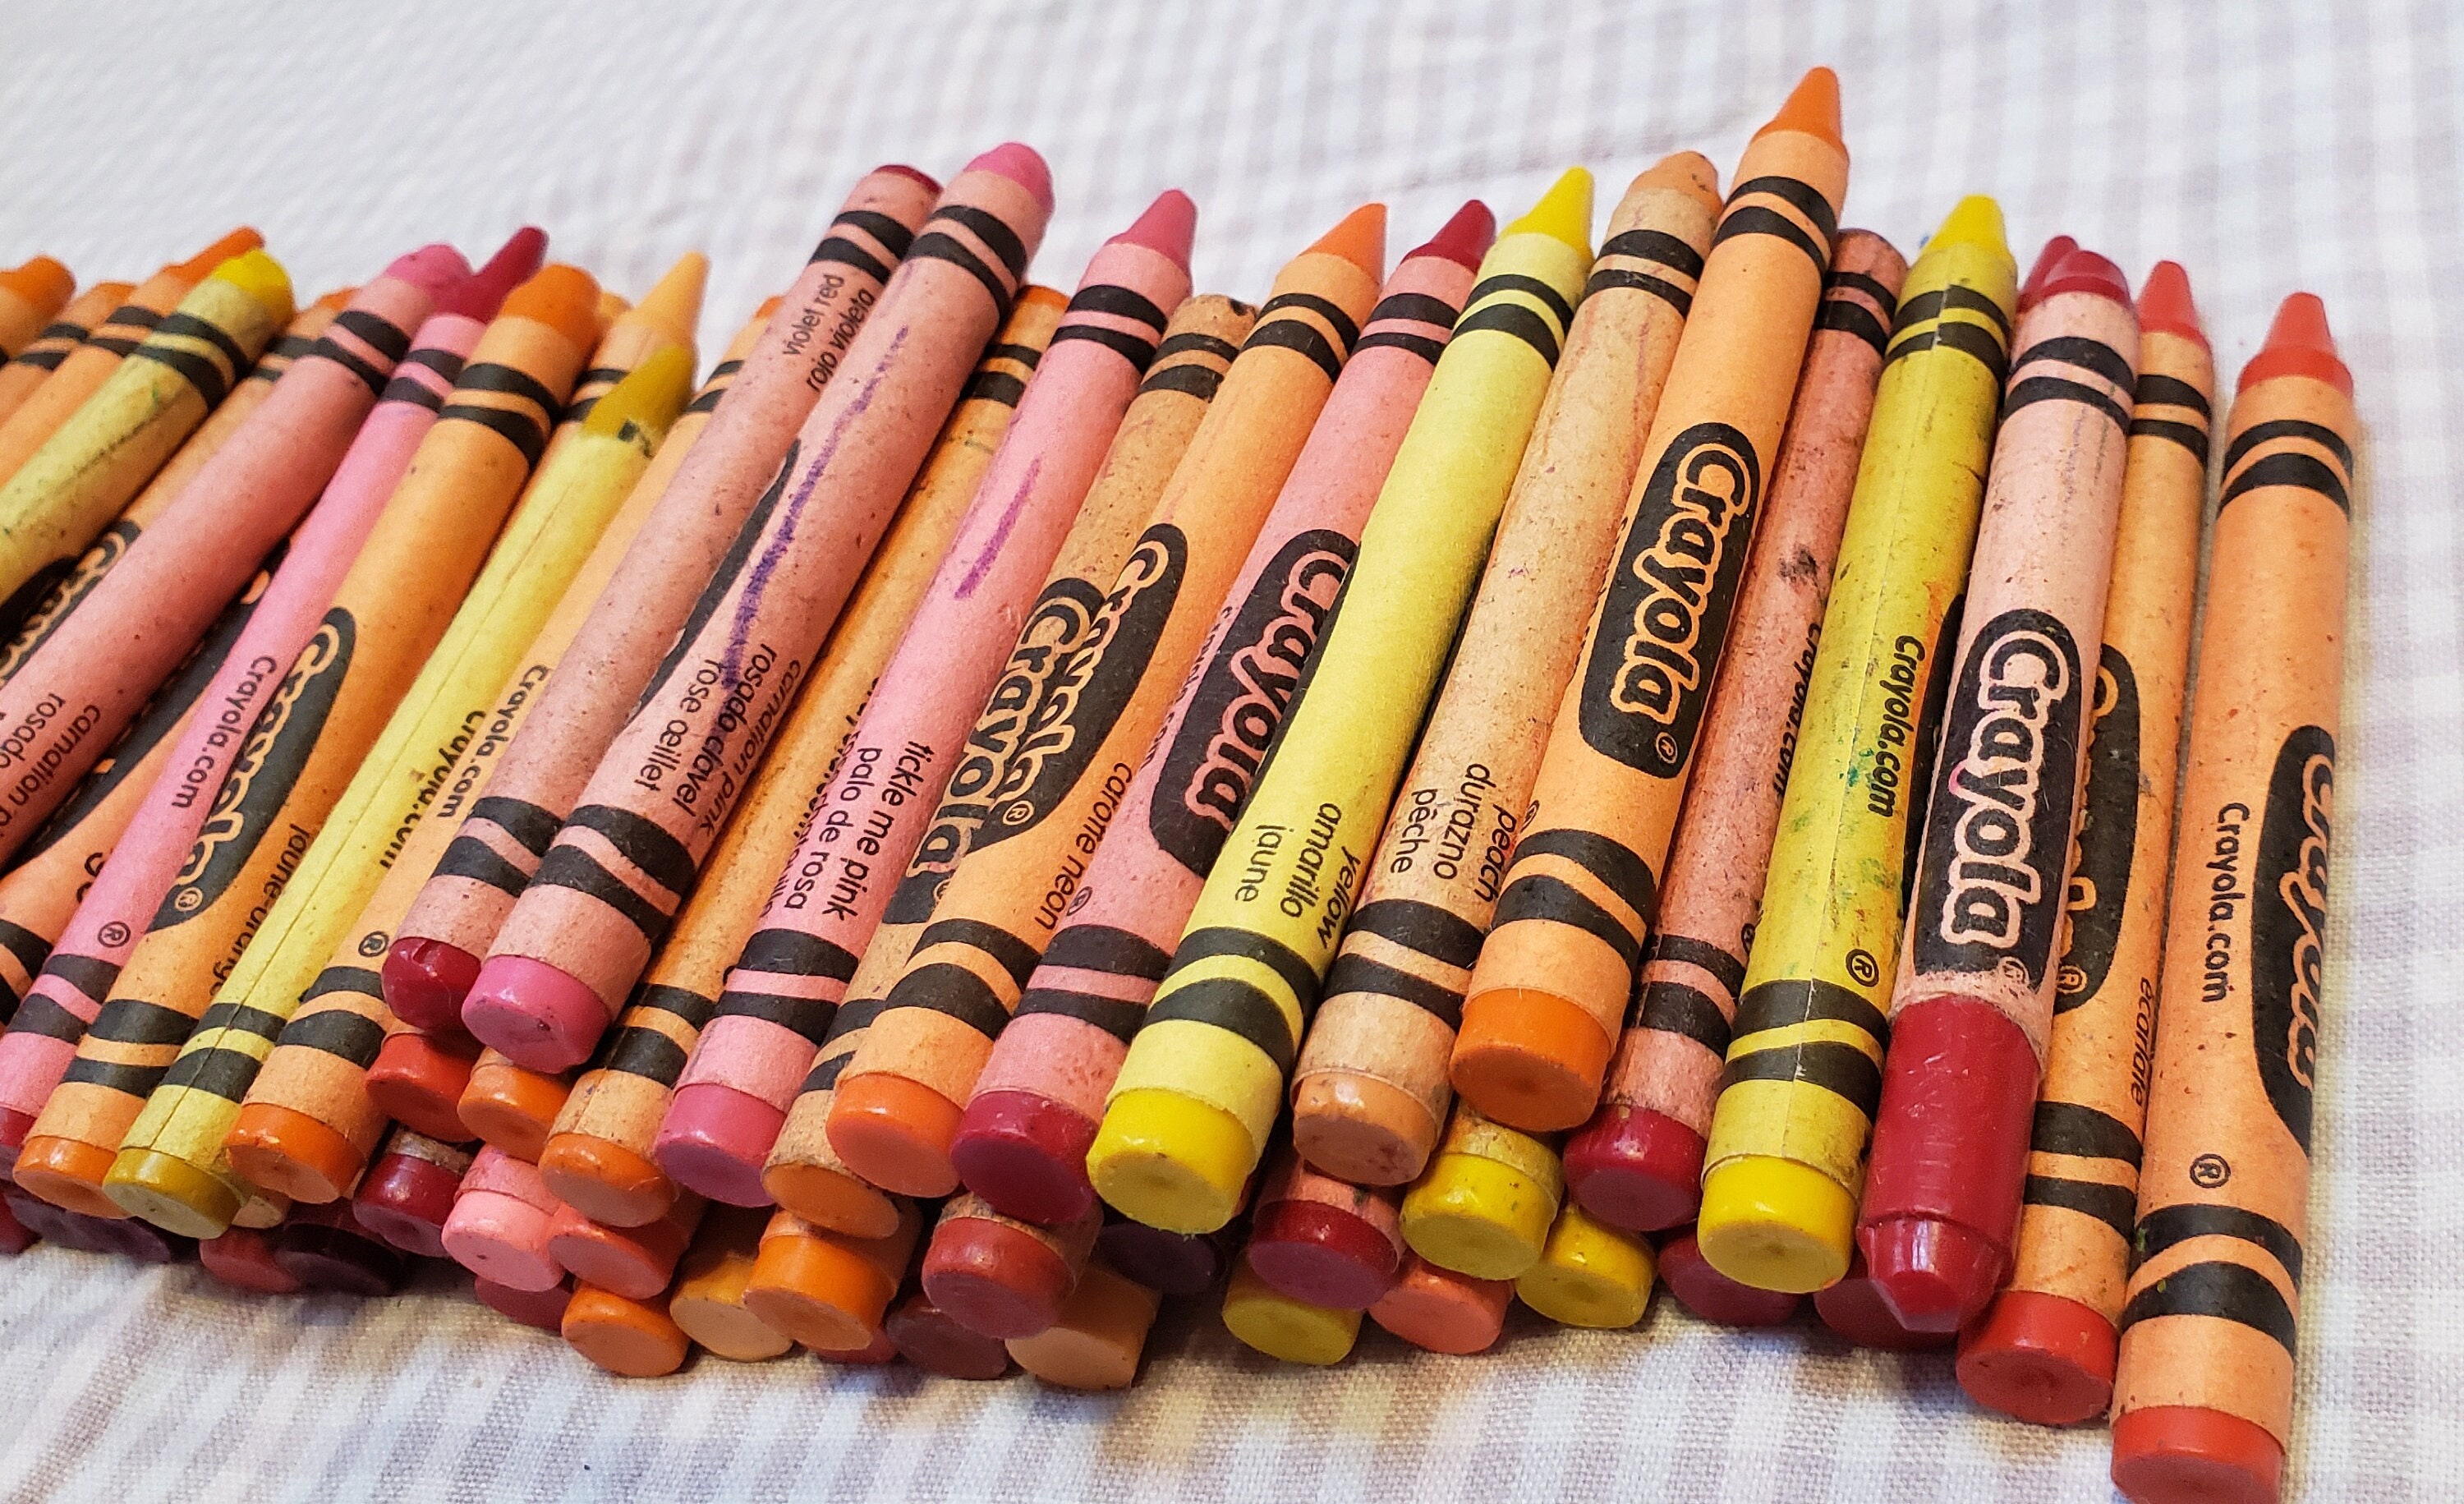 unopened box of 64 crayon colors turns out to just be orange : r